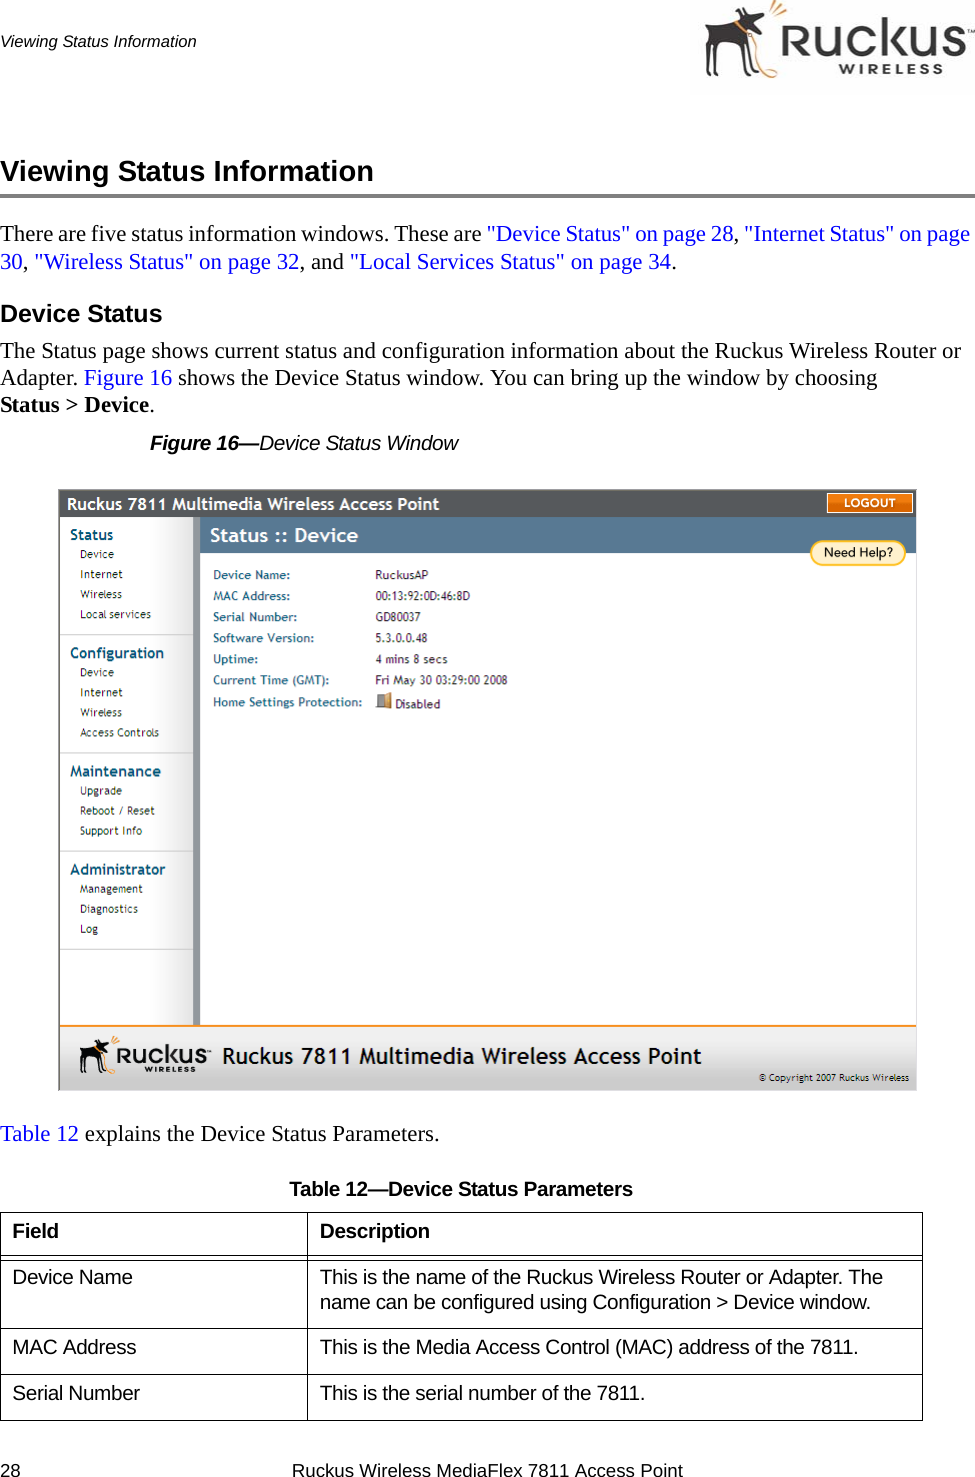 28 Ruckus Wireless MediaFlex 7811 Access PointViewing Status InformationViewing Status InformationThere are five status information windows. These are &quot;Device Status&quot; on page 28, &quot;Internet Status&quot; on page 30, &quot;Wireless Status&quot; on page 32, and &quot;Local Services Status&quot; on page 34.Device StatusThe Status page shows current status and configuration information about the Ruckus Wireless Router or Adapter. Figure 16 shows the Device Status window. You can bring up the window by choosing Status &gt; Device.Figure 16—Device Status WindowTable 12 explains the Device Status Parameters.Table 12—Device Status ParametersField DescriptionDevice Name This is the name of the Ruckus Wireless Router or Adapter. The name can be configured using Configuration &gt; Device window. MAC Address This is the Media Access Control (MAC) address of the 7811.Serial Number This is the serial number of the 7811.